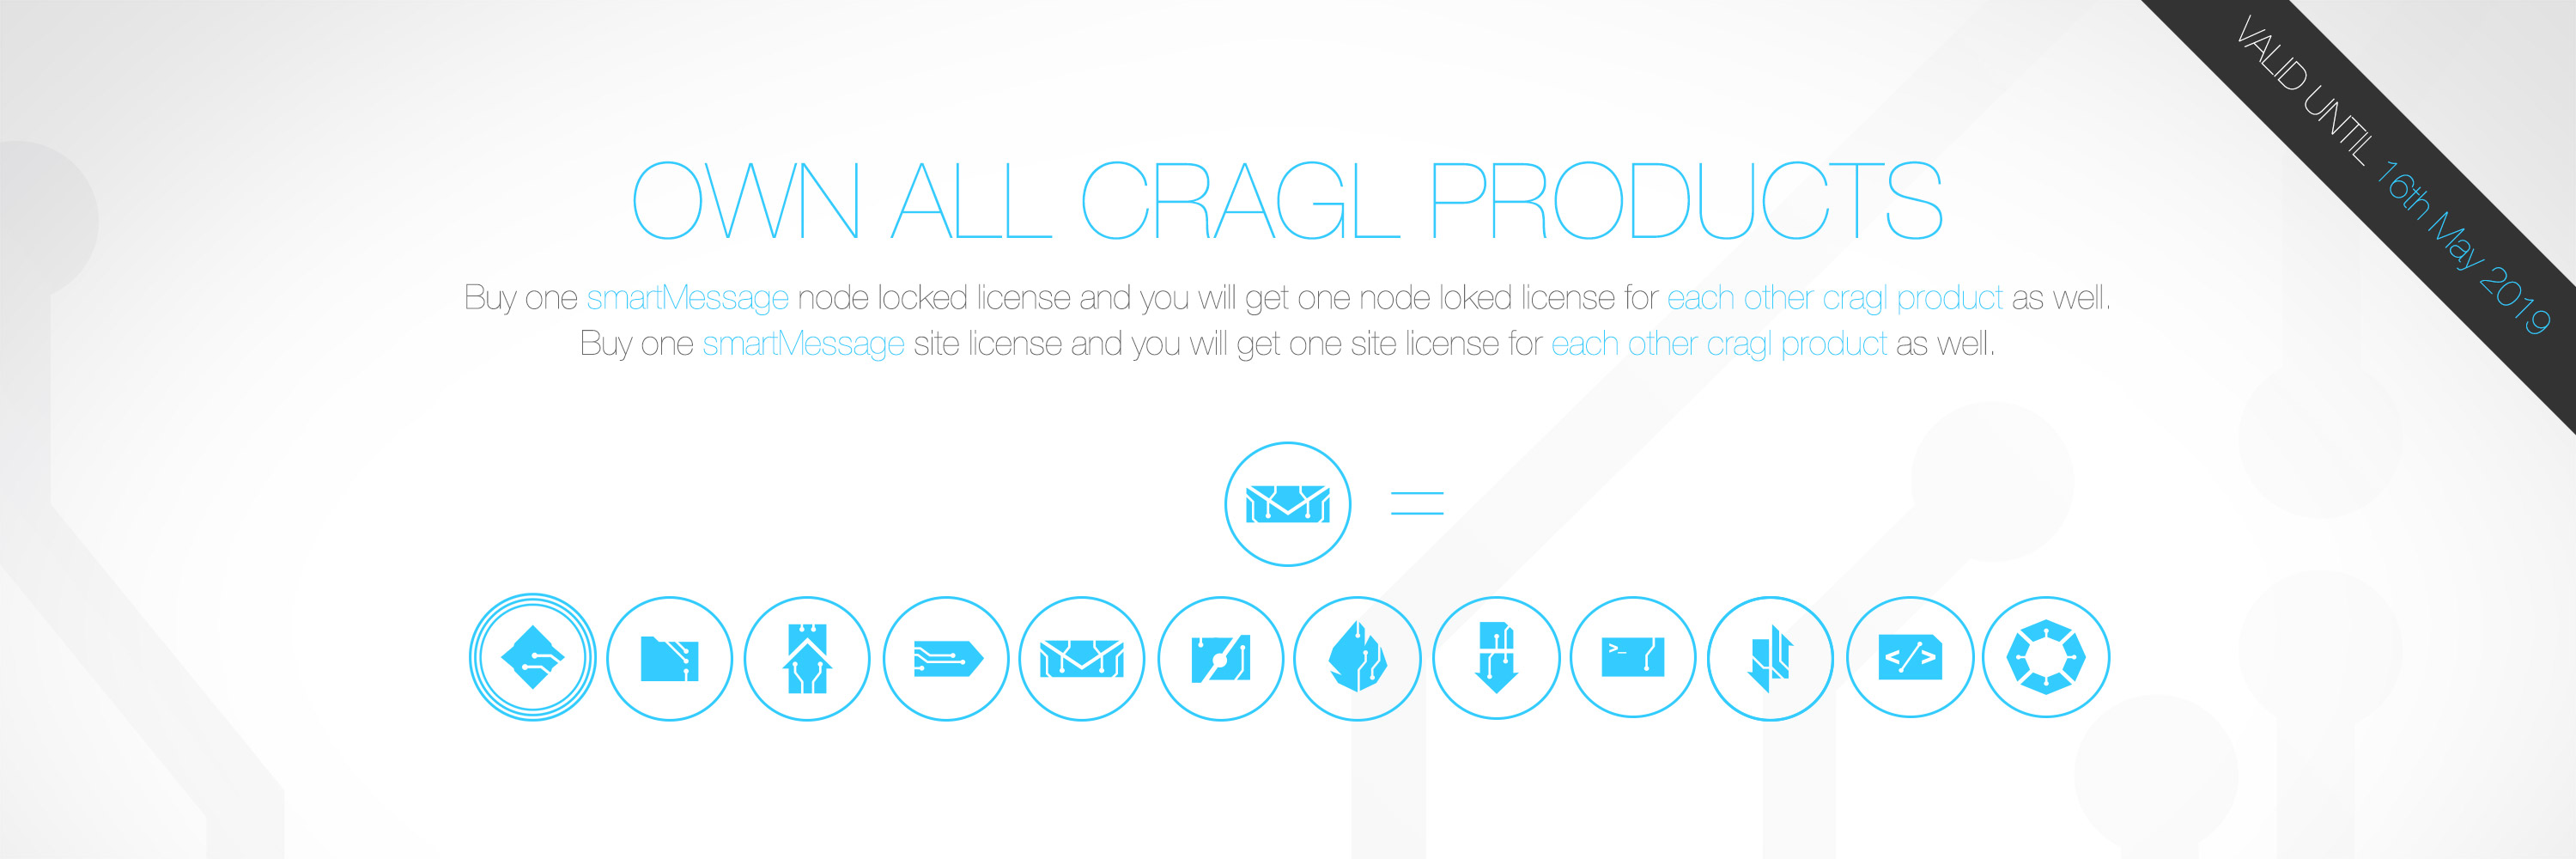 Own all cragl products